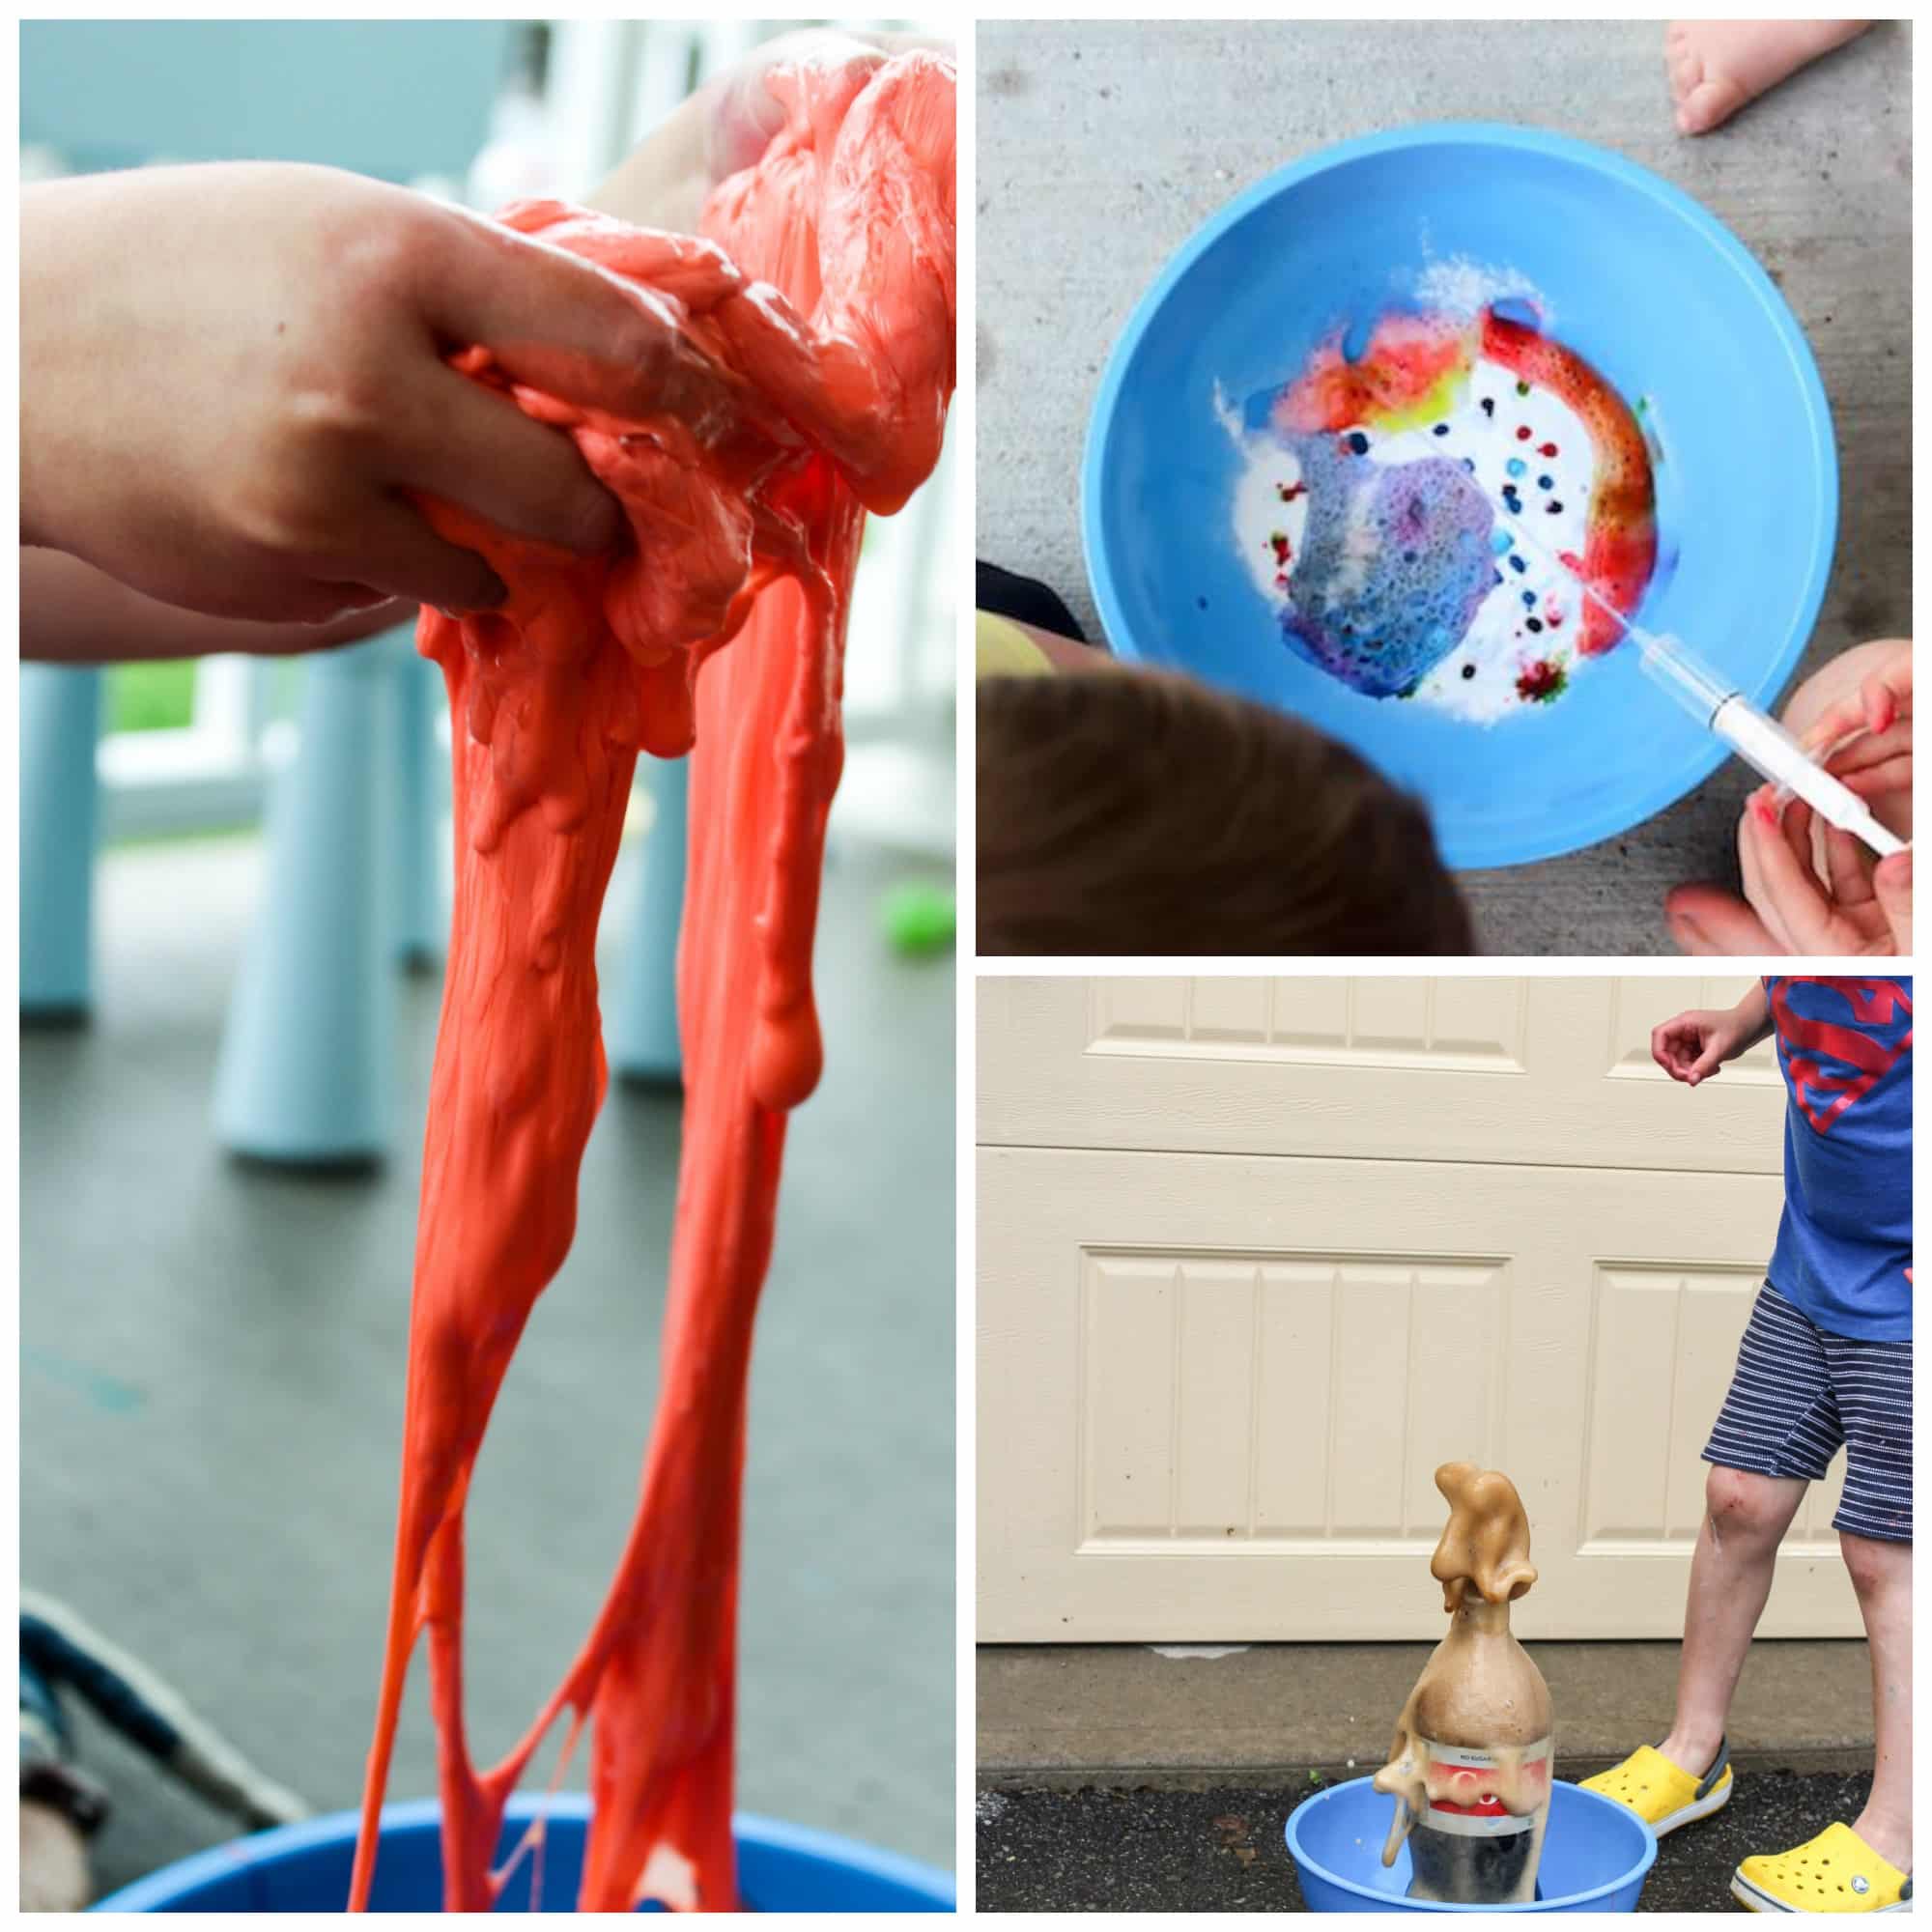 It doesn't take a science degree to execute simple science activities for preschoolers. In fact, all you need are common household items and minimal prep to teach children about physical and chemical reactions. Find basic ideas to promote physics and biology as well as three science activities for preschoolers here.